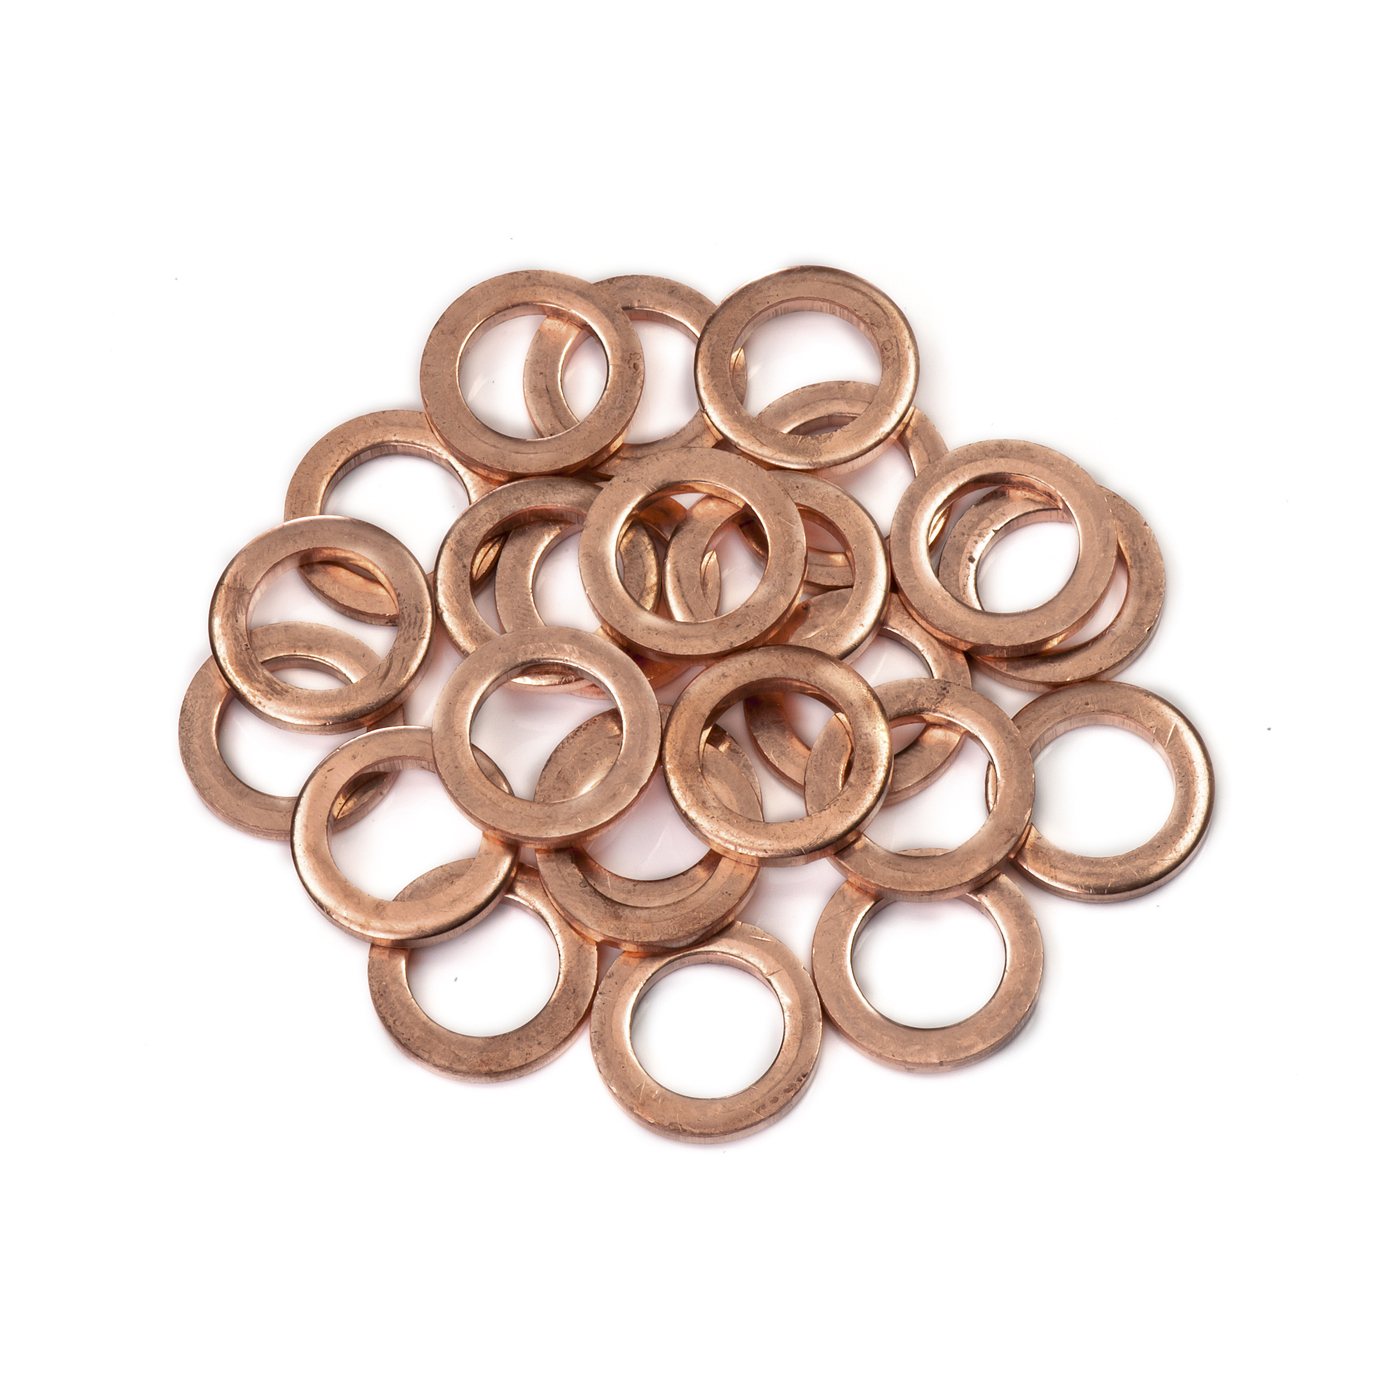 Copper Rings, for Ring Stretcher and Reducer - 24 pieces